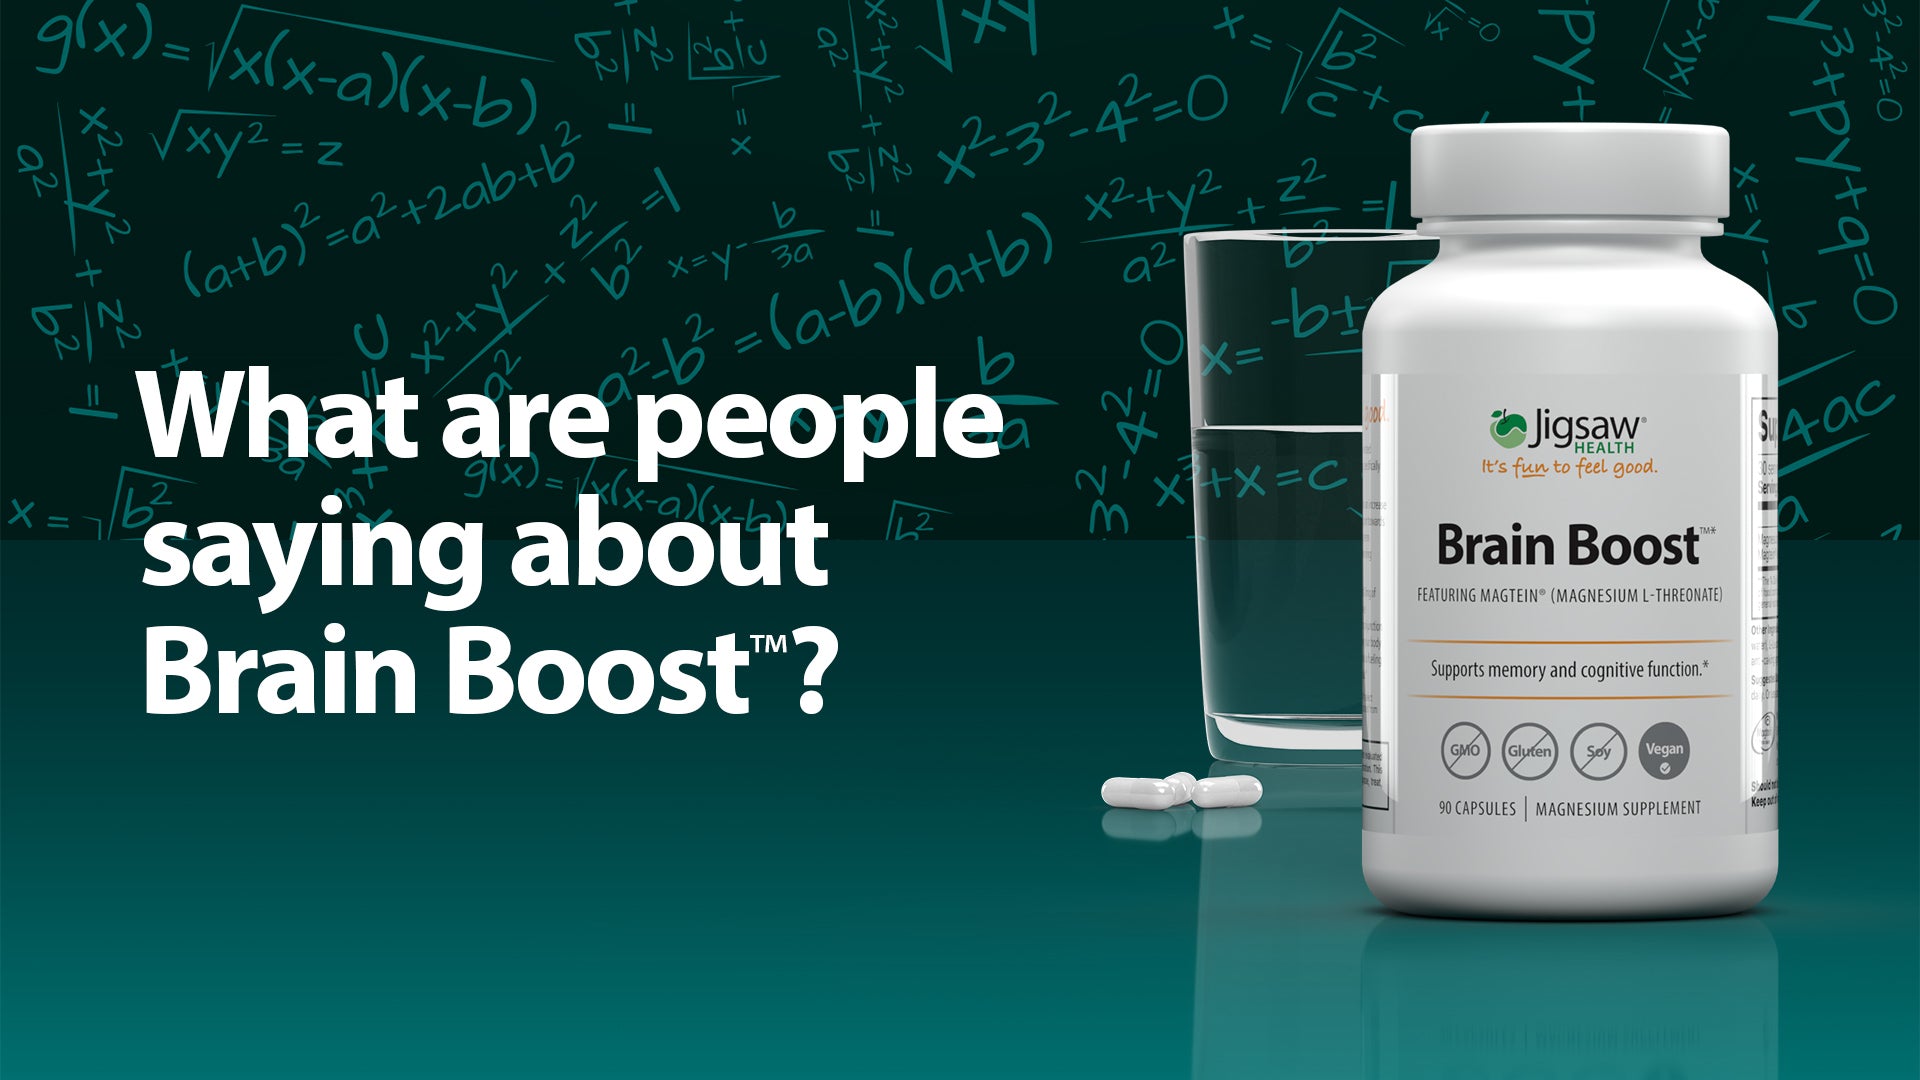 What are people saying about Jigsaw Brain Boost?